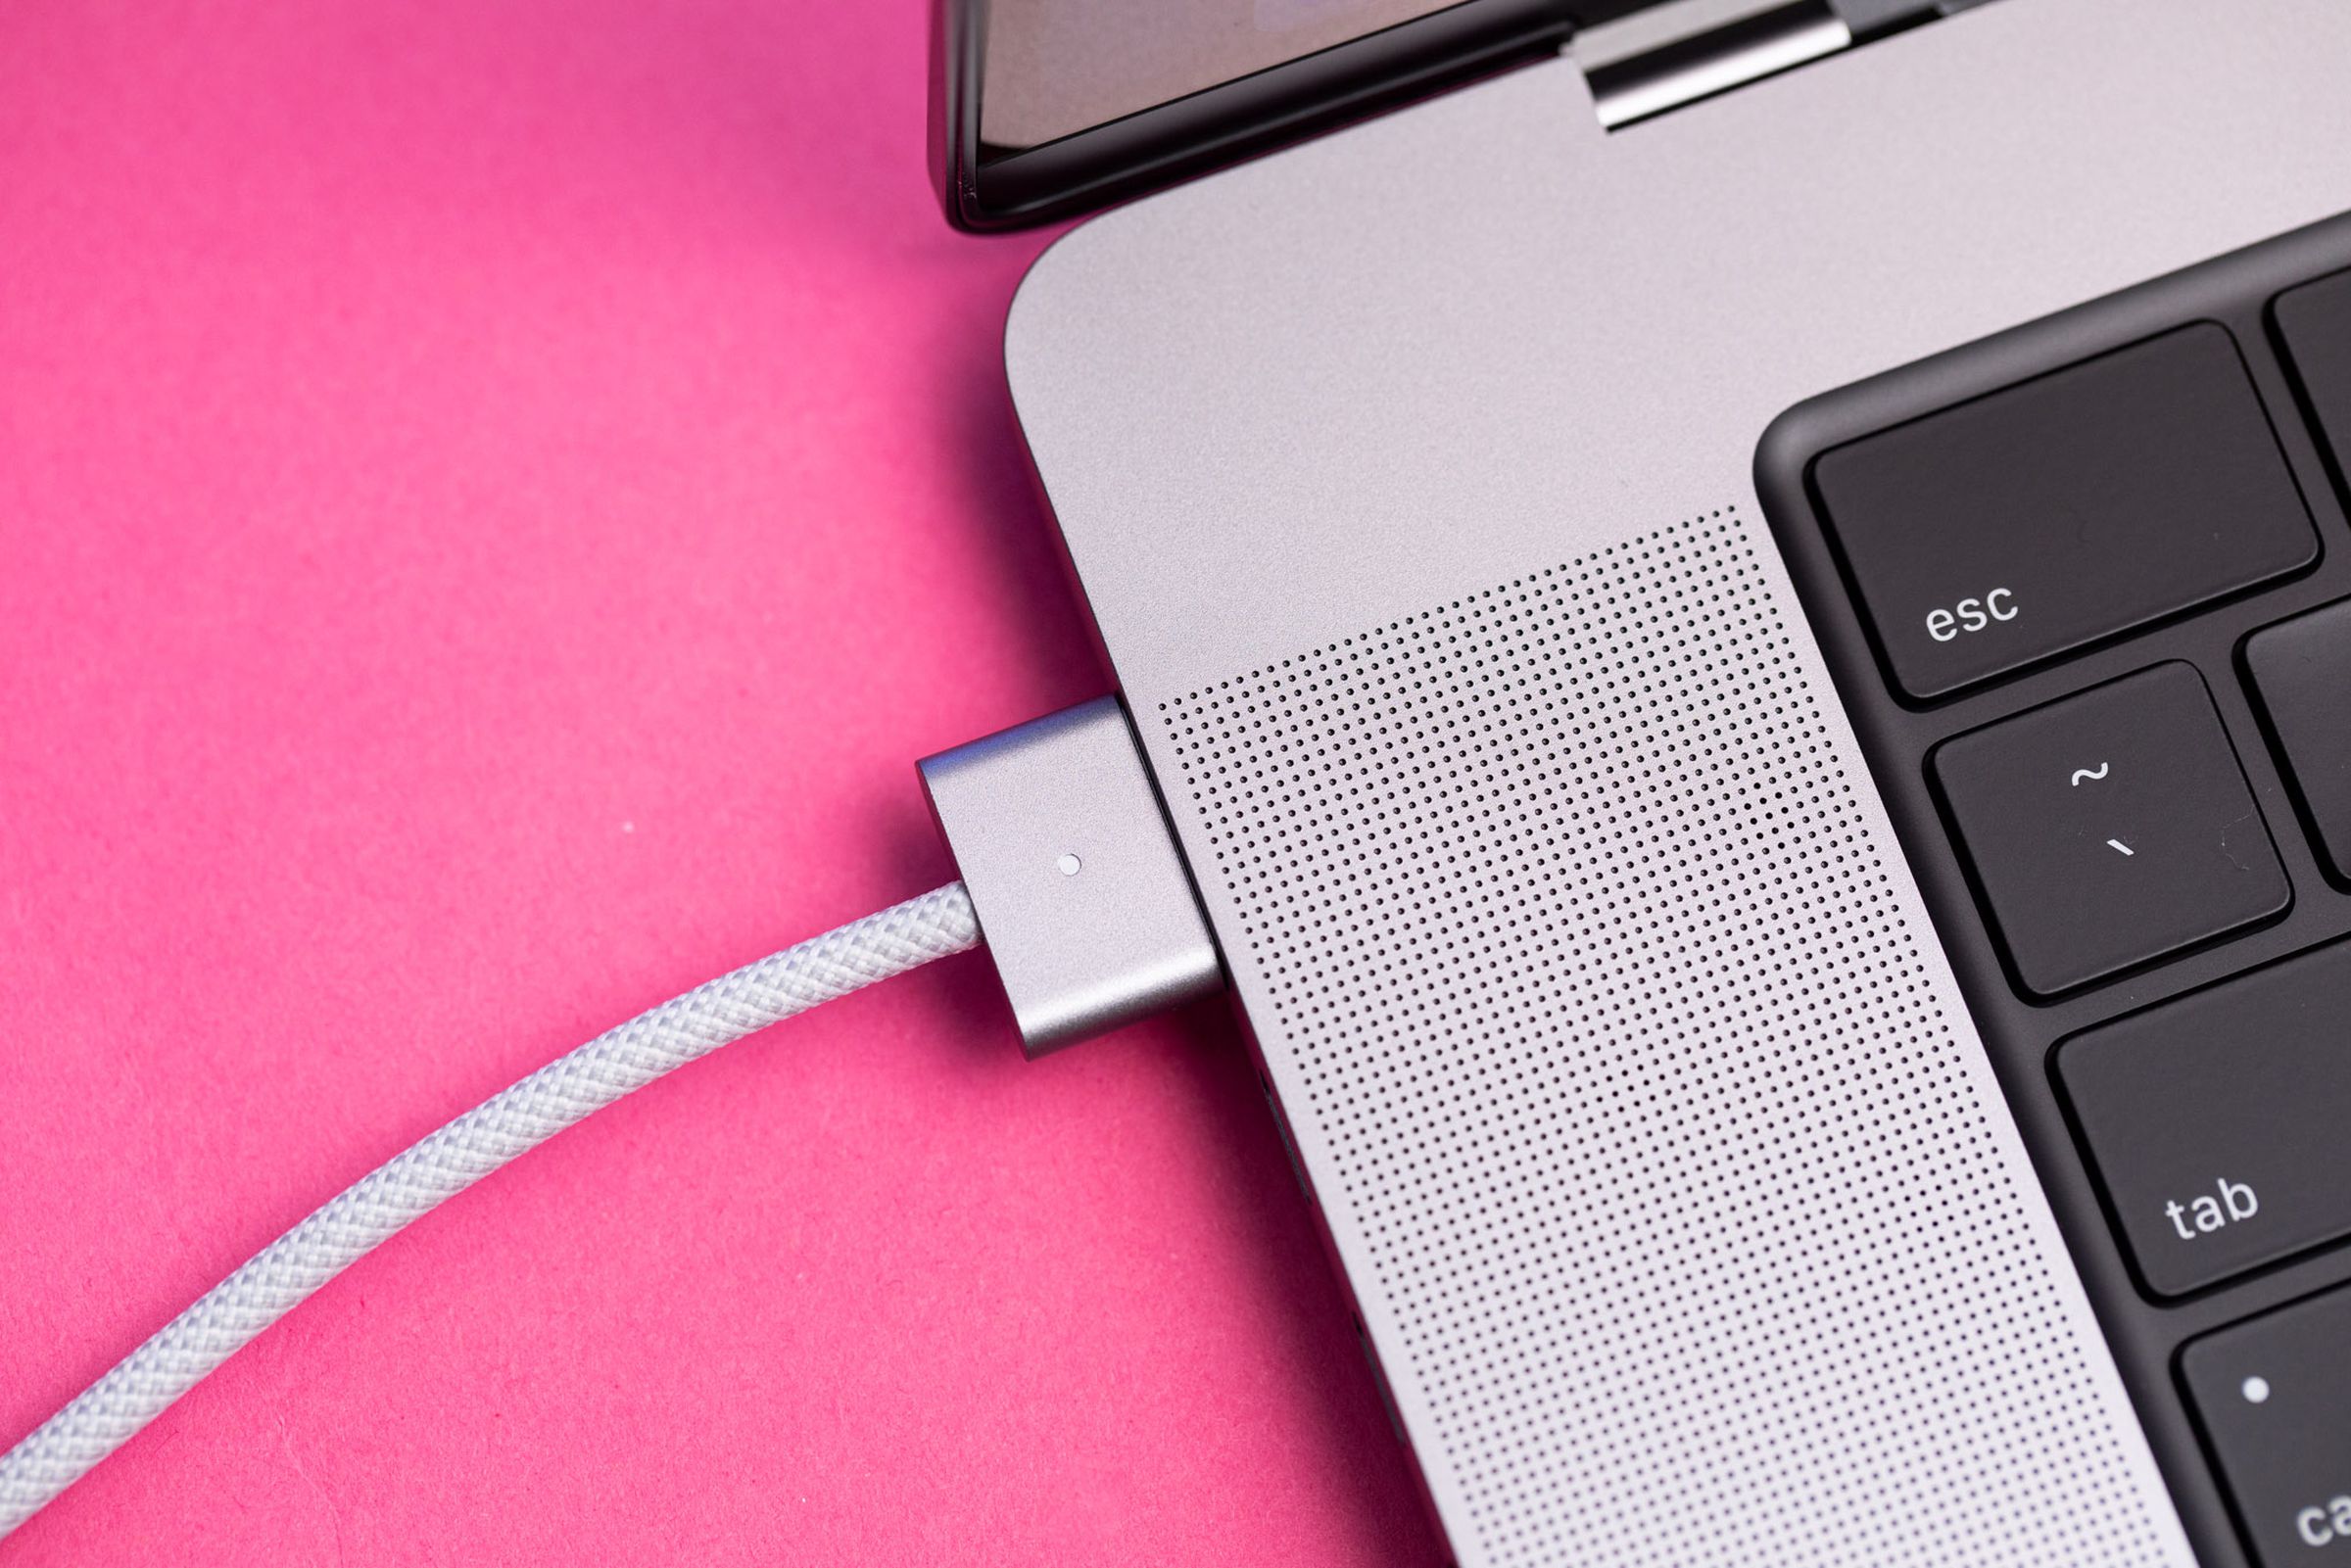 The MagSafe charger plugged into the MacBook Pro 16.